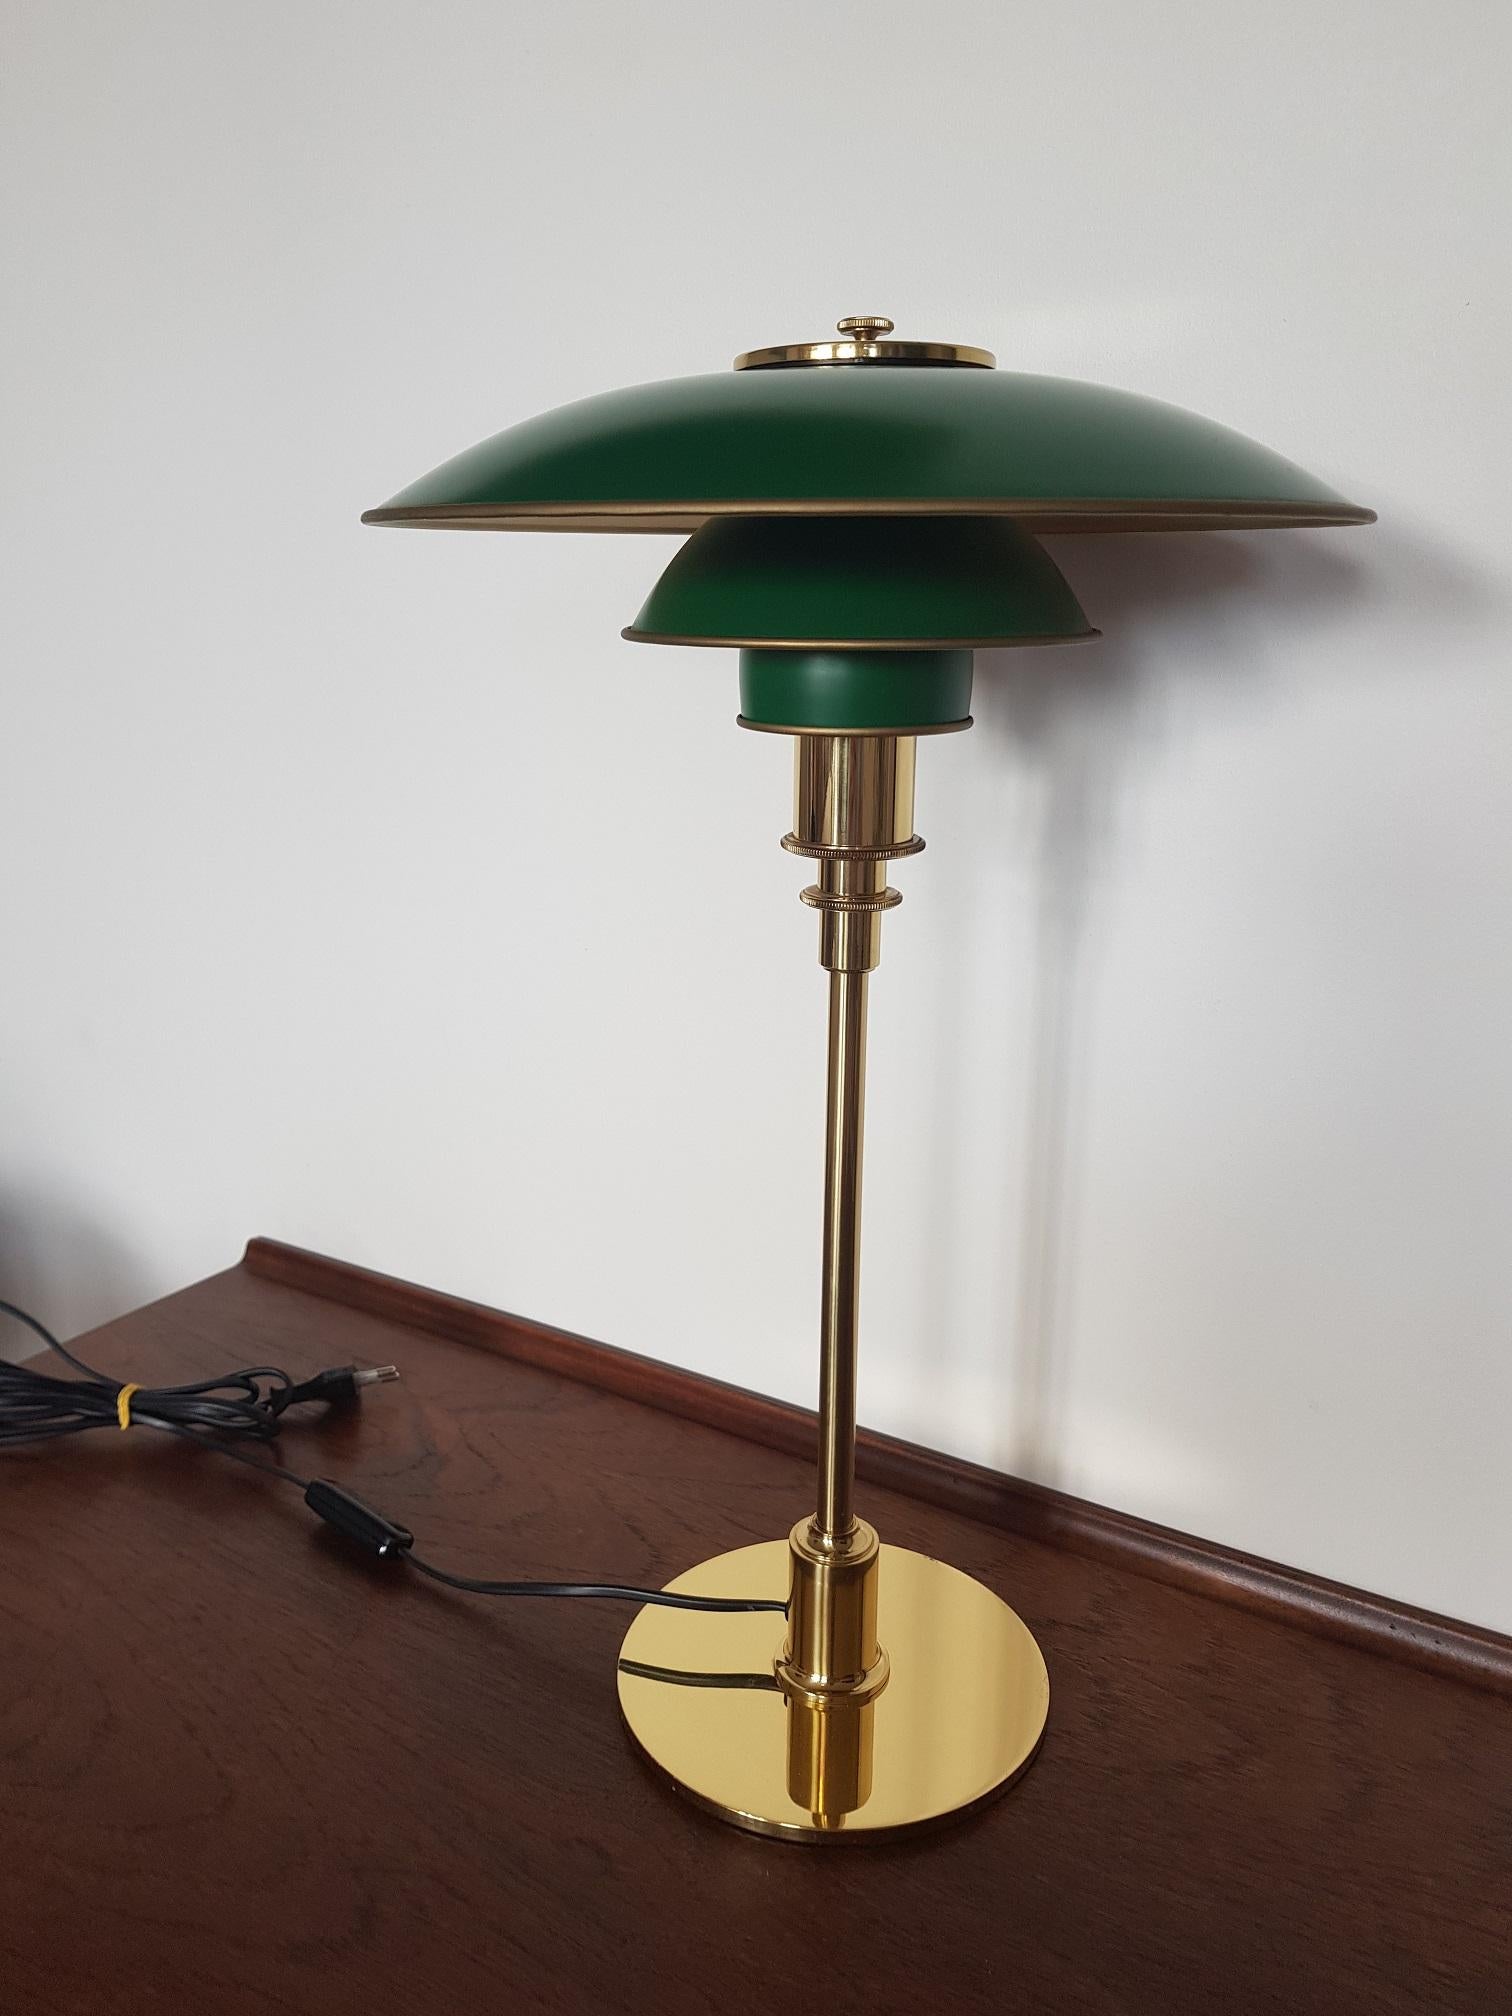 Green enameled shades on polished brass stem, foot and socket cover. Anniversary edition produced only for a year in the late 20th century. The iconic 3/2 table lamp decorates beautiful homes across the world and can be seen in movies and ads all